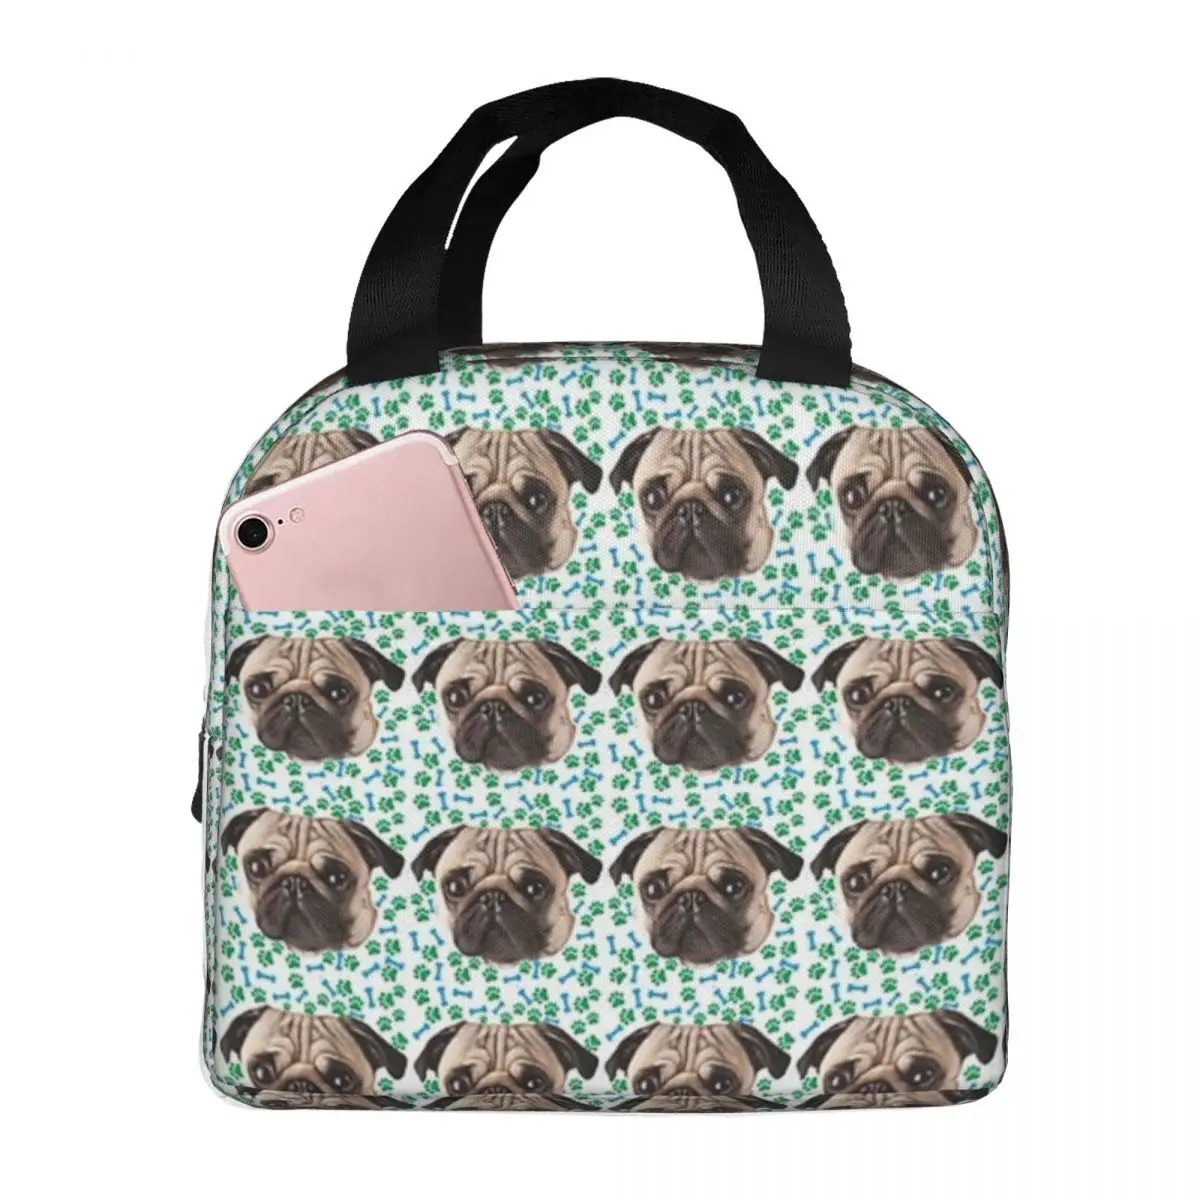 

Cute Dog Pug Insulated Lunch Bags Resuable Picnic Bags Thermal Cooler Lunch Box Lunch Tote for Woman Work Kids School